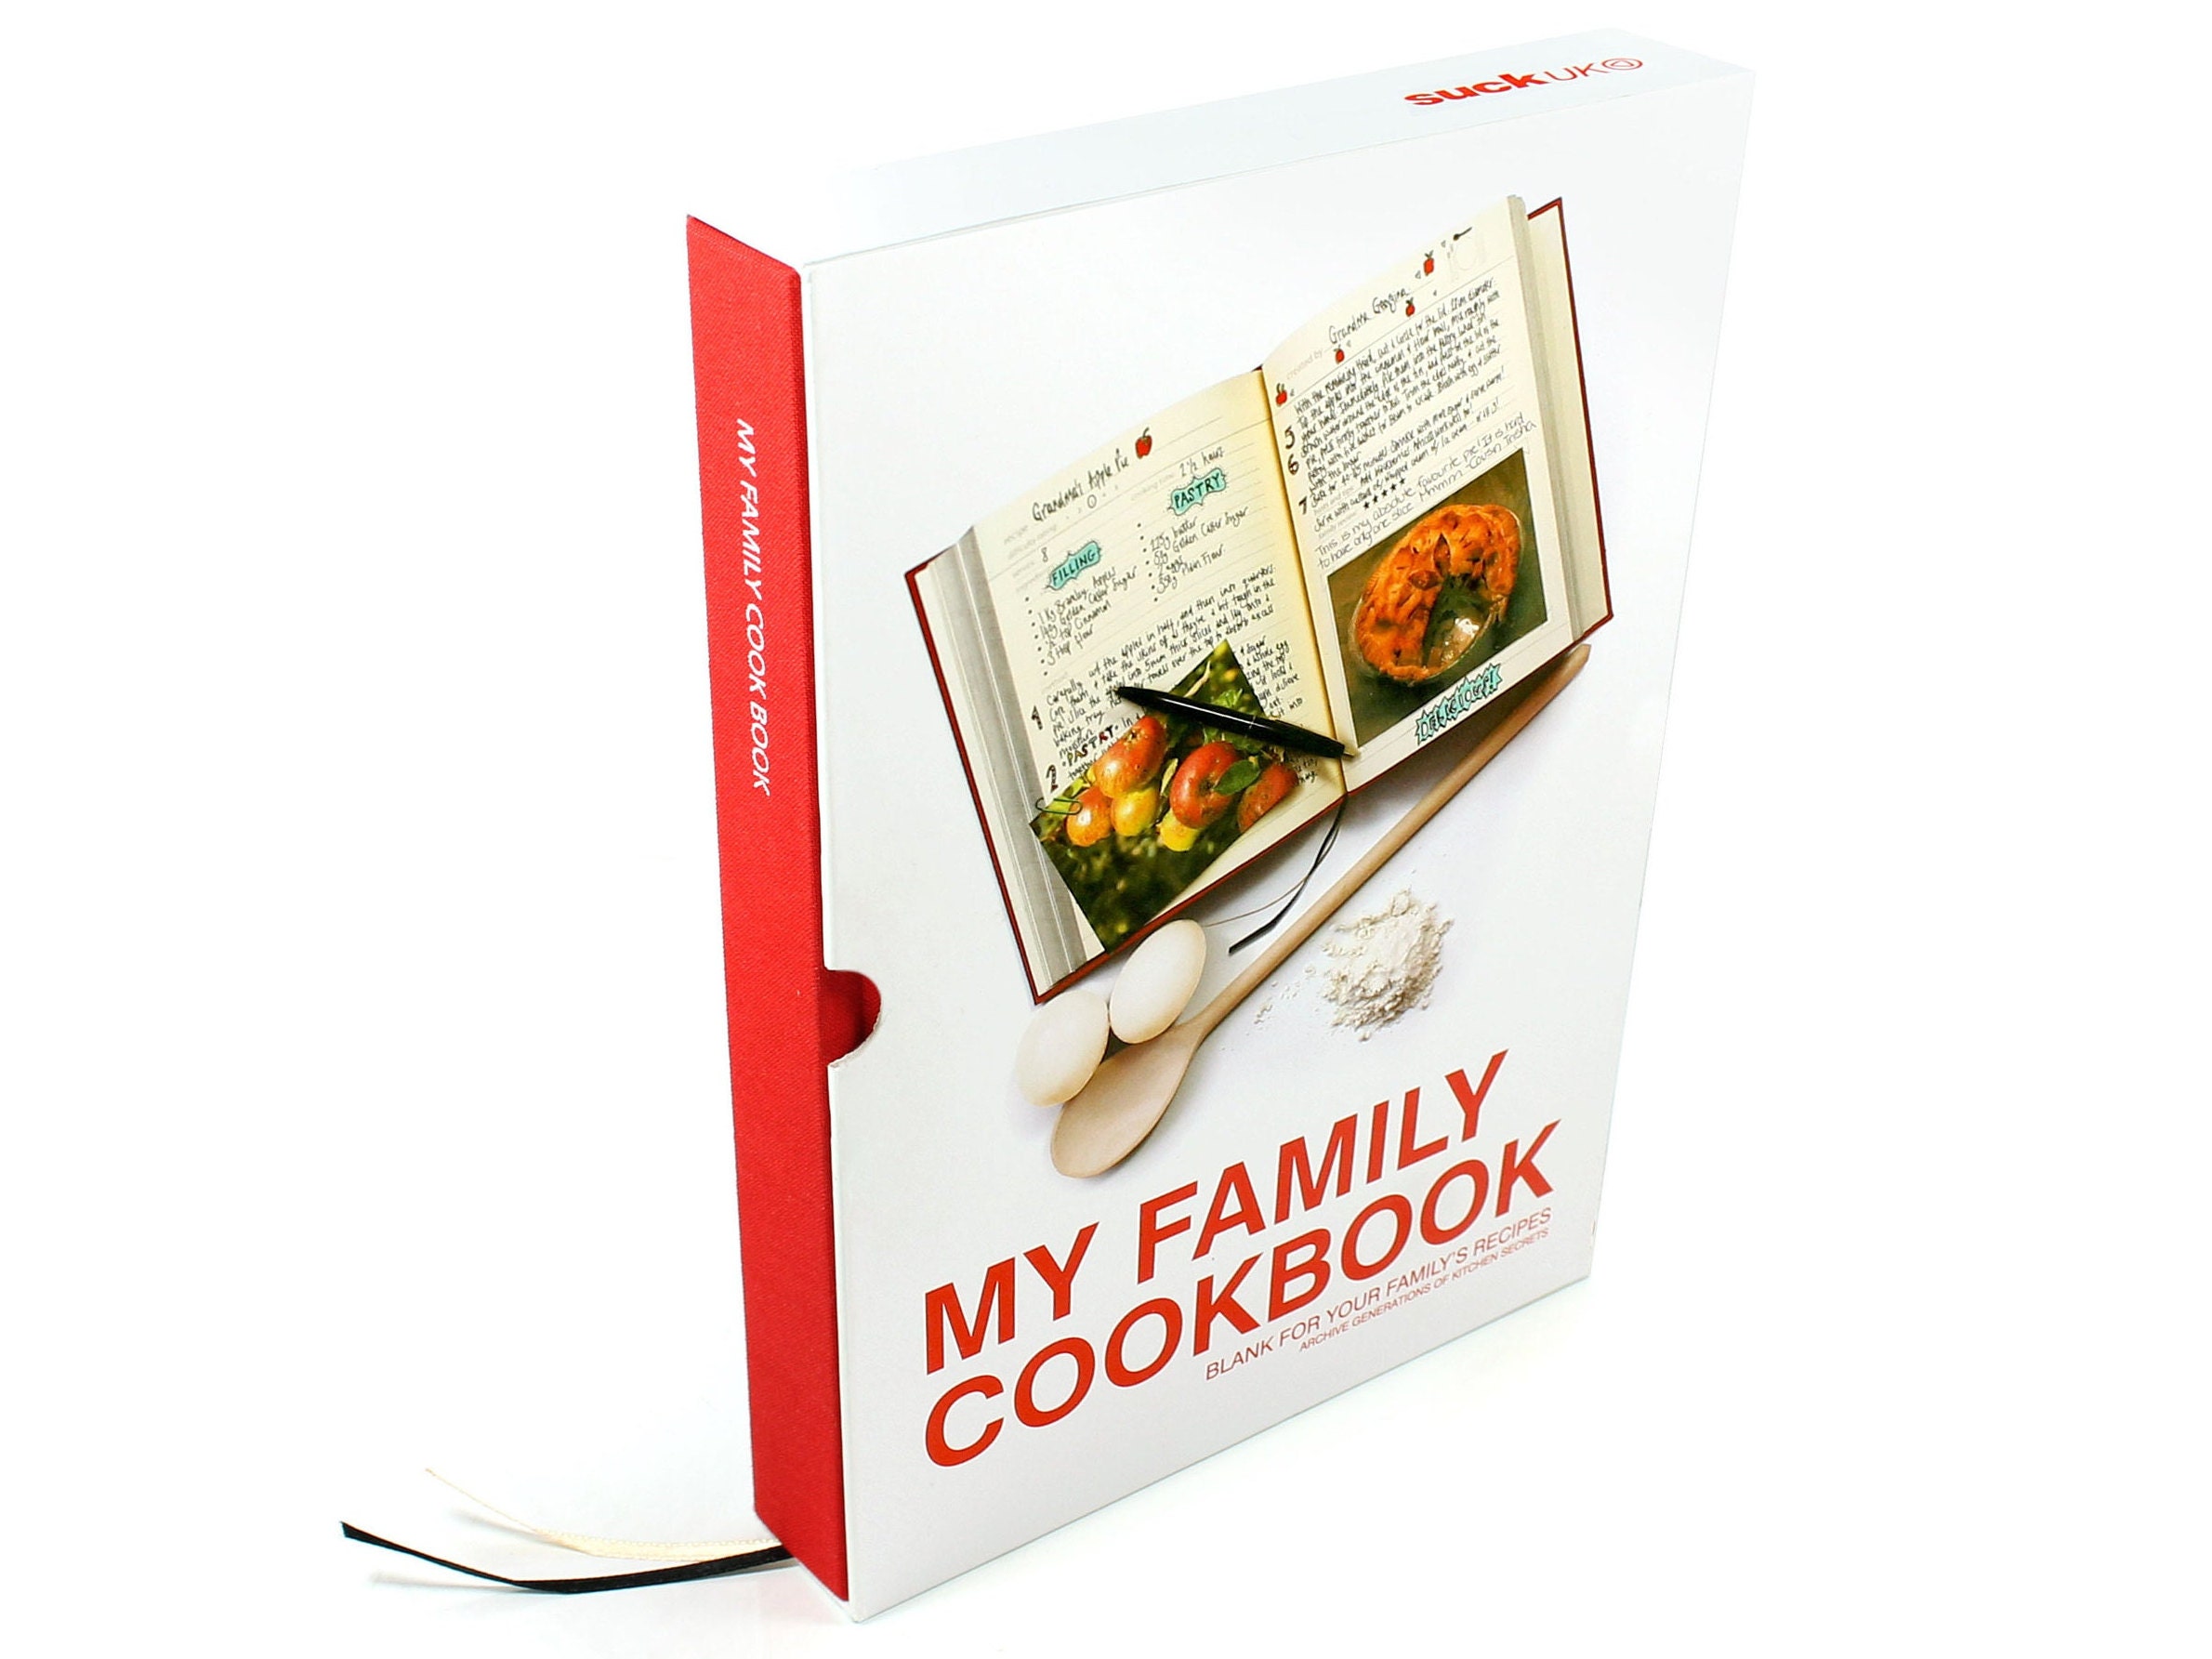 Blank Recipe Book to Write Your Own Recipes, 120 Pages, 60 Sheets, Floral  and Orange Theme, 8 Sections to Organize Your Recipes, Glossy Laminated